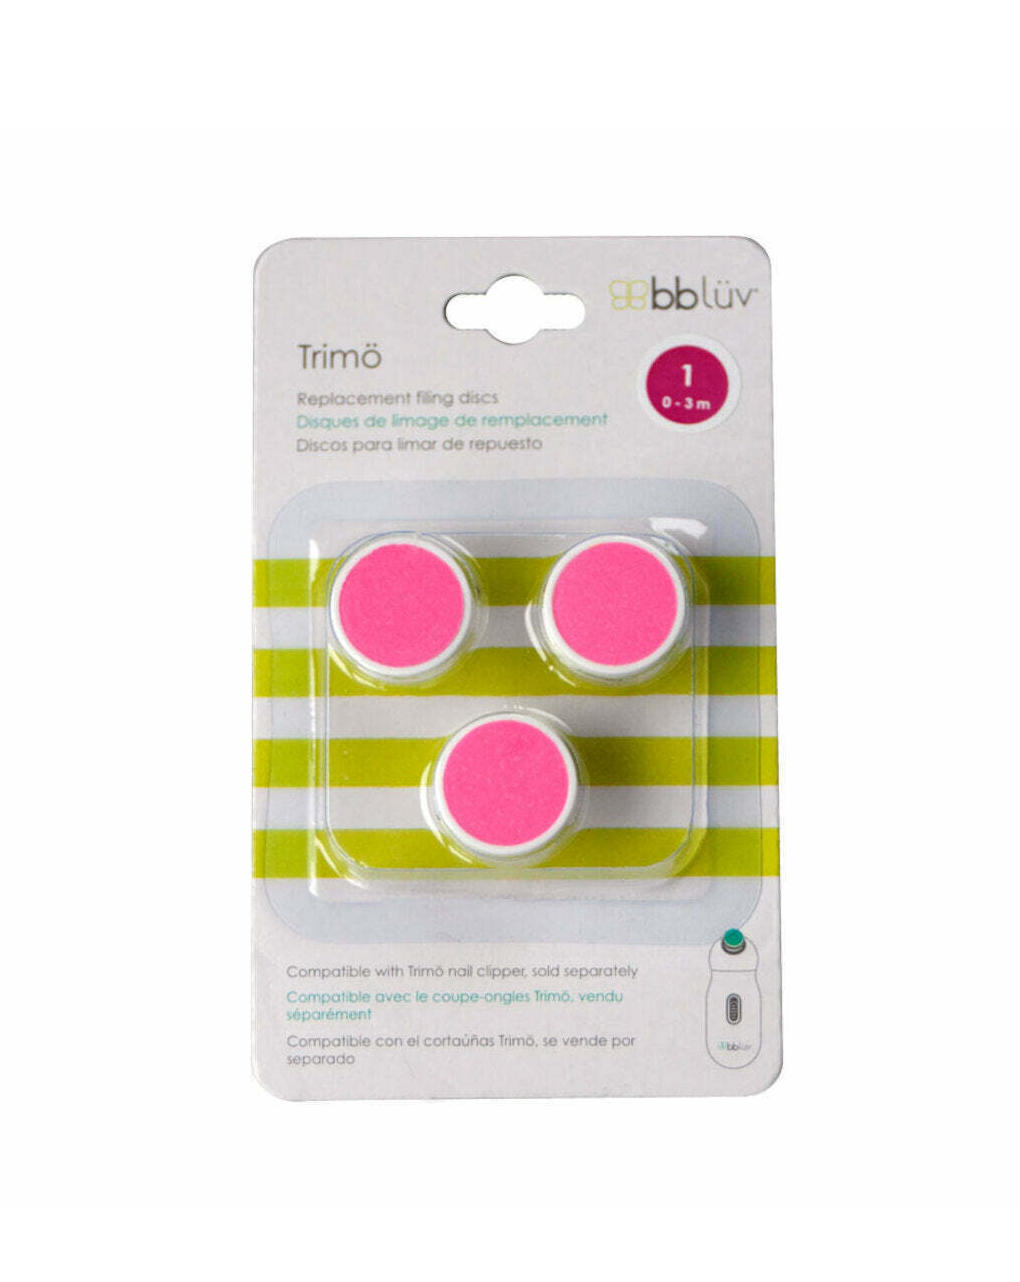 Bbluv βρεφικές λίμες trimo replacement filing discs step 1 (0-6m) 3 τμχ - Bbluv